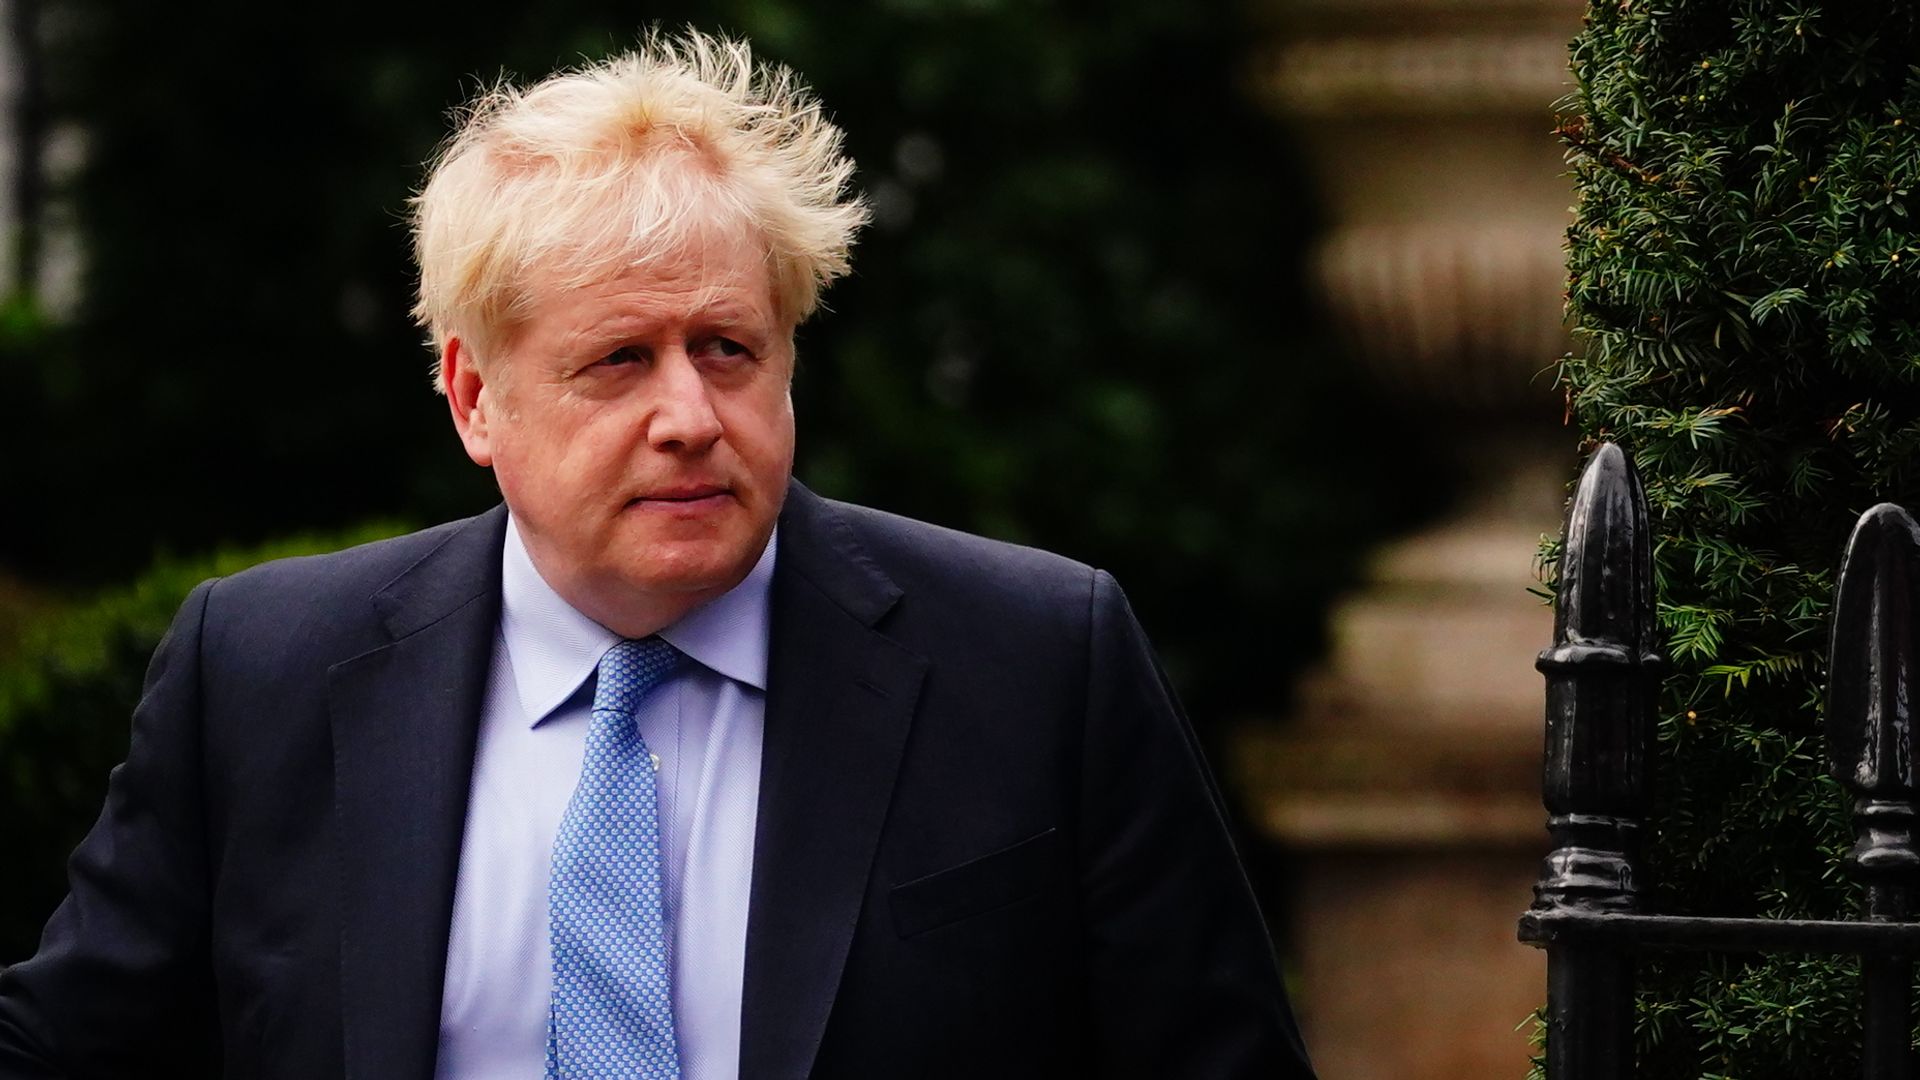 Boris Johnson breached rules by being 